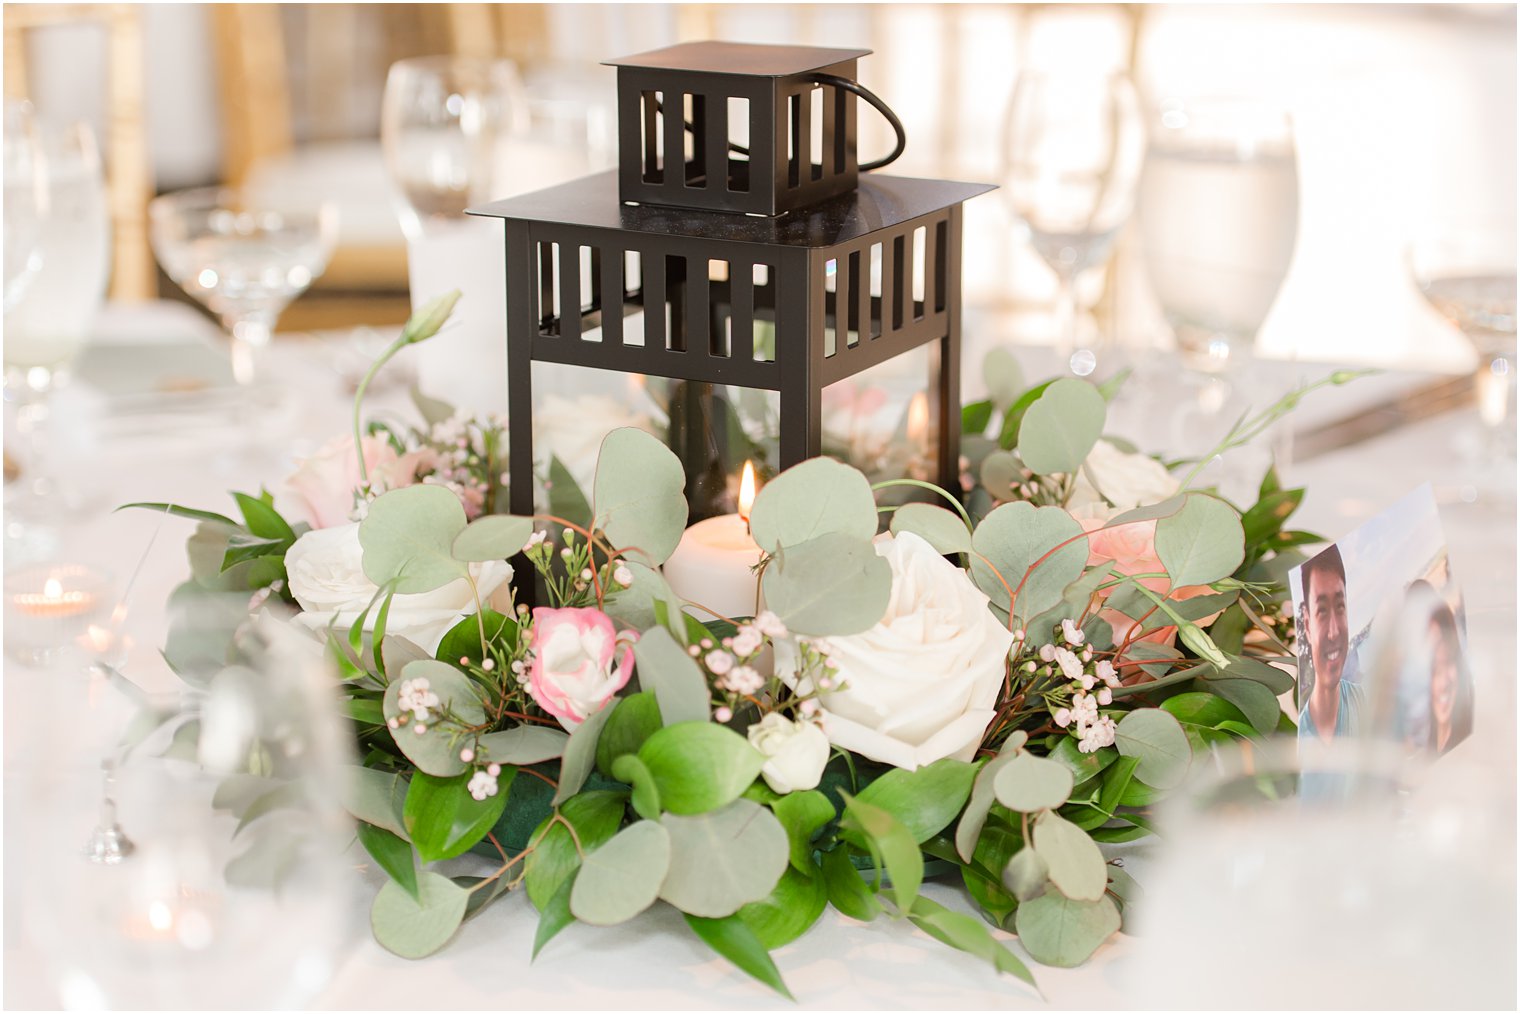 centerpieces for NJ wedding reception with black lanterns in white flowers 